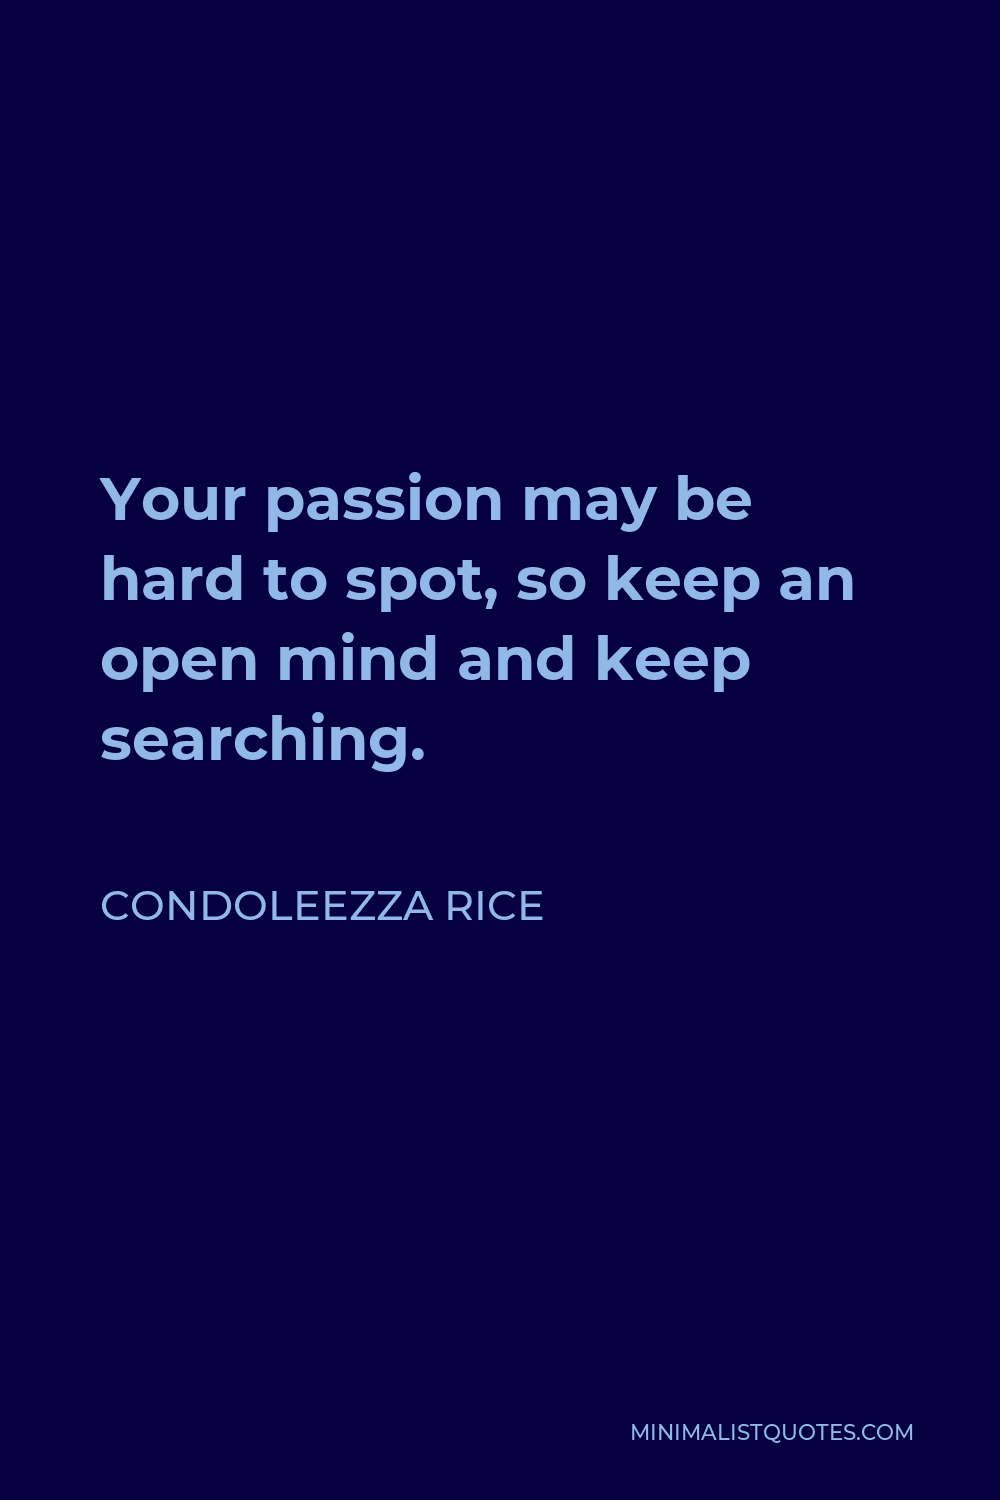 Condoleezza Rice Quote - Your passion may be hard to spot, so keep an open mind and keep searching.